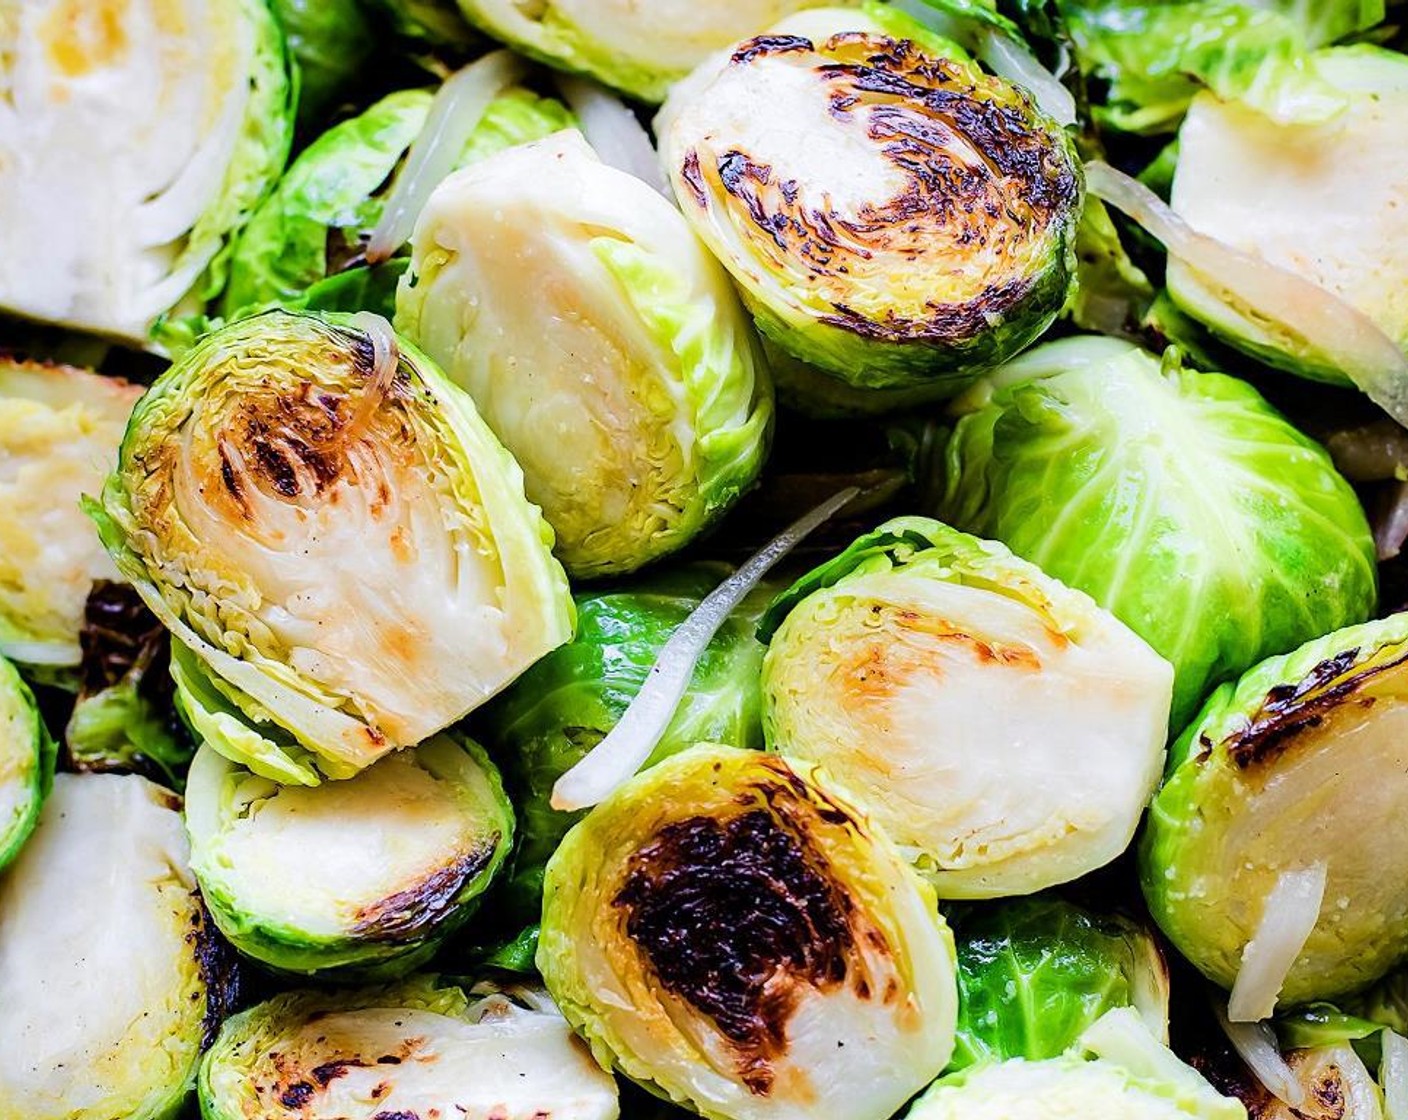 step 5 Add Olive Oil (1 Tbsp) to a skillet or fry pan. Heat on medium heat then add in your Brussels sprouts and Shallot (1). Pan Fry on medium-high for 7-10 minutes or until Brussels Sprouts start to get tender and crispy brown on edges.